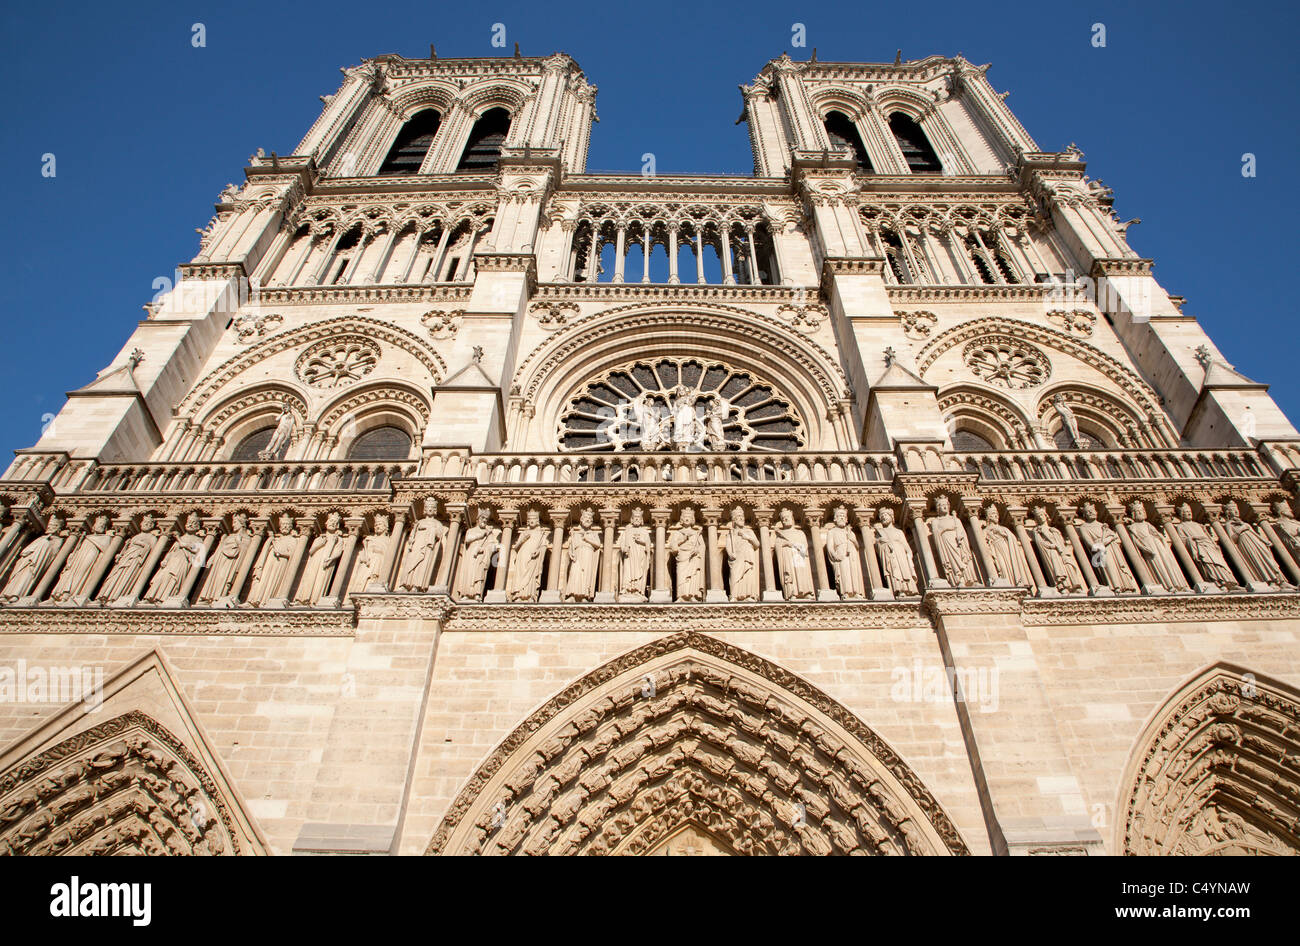 Paris - Notre-Dame cathedral - west facade Stock Photo